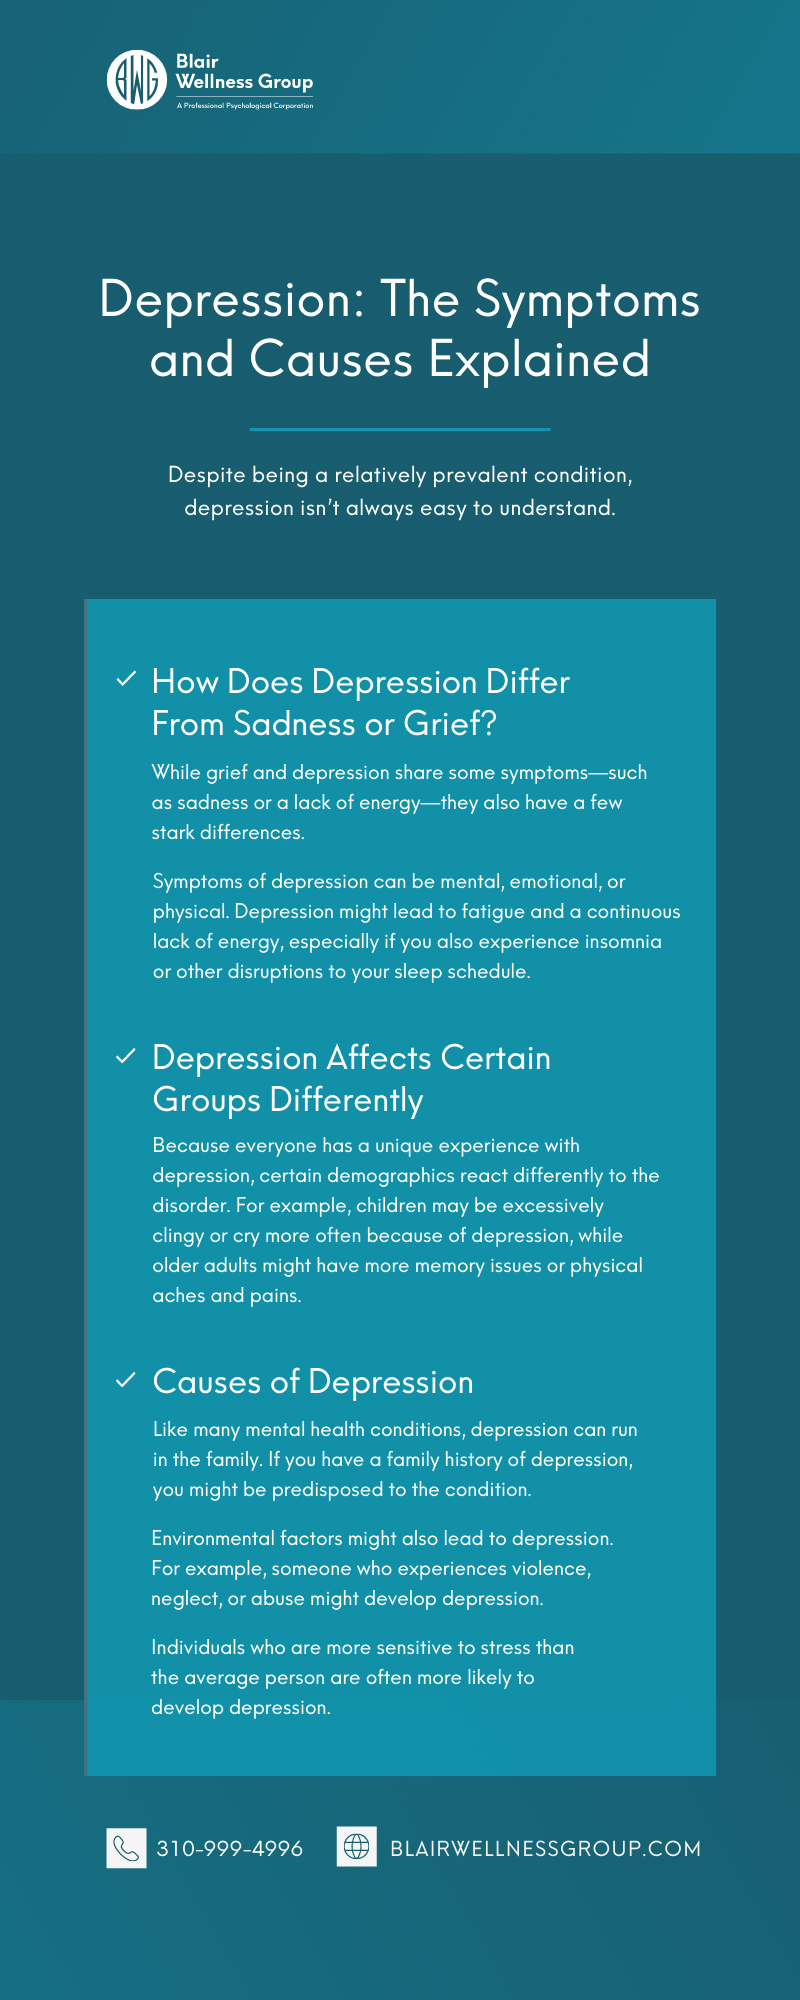 Depression: The Symptoms and Causes Explained